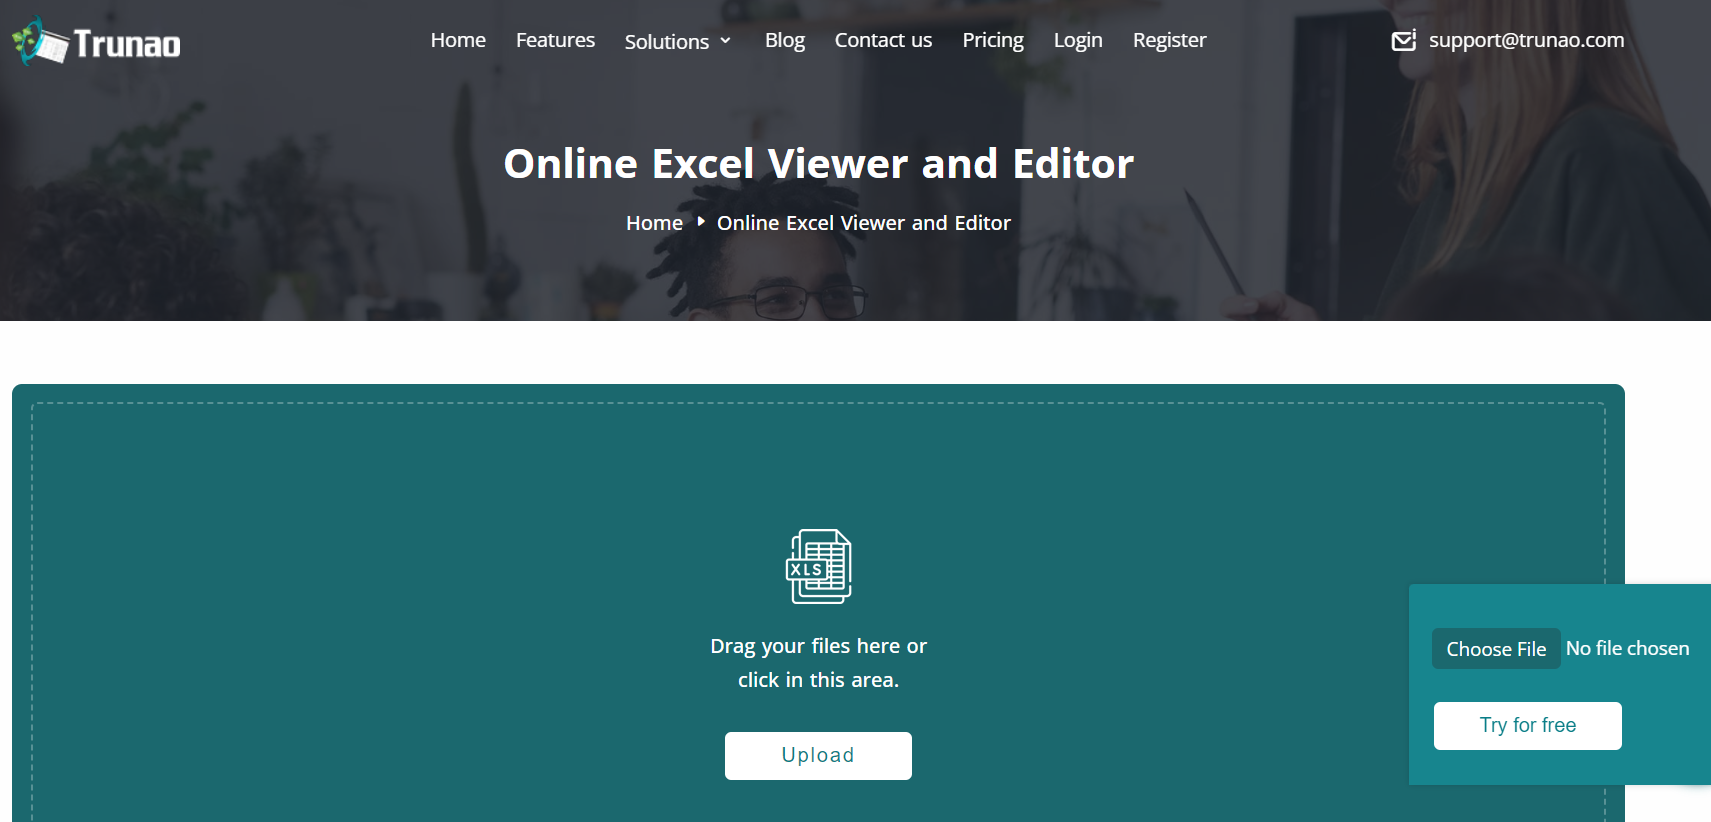 Trunao Online Excel Editor & Viewer